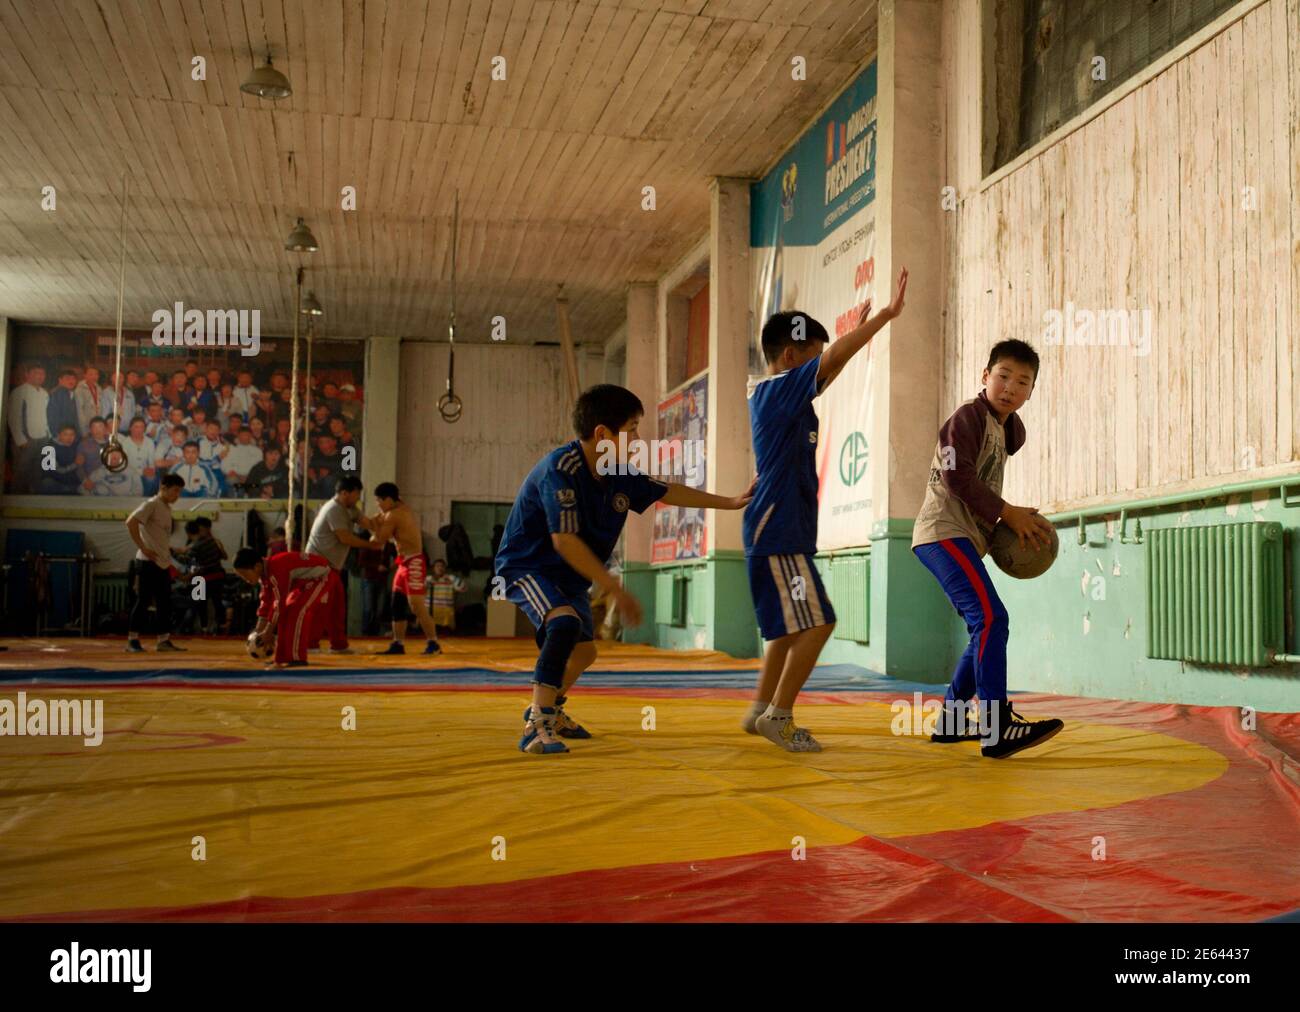 Children play basketball at a gym which they share with Mongolia's Olympic  freestyle 60kg wrestler Mandakhnaran Ganzorig in Ulan Batur, October 27,  2011. While the elite of the sporting world tune up